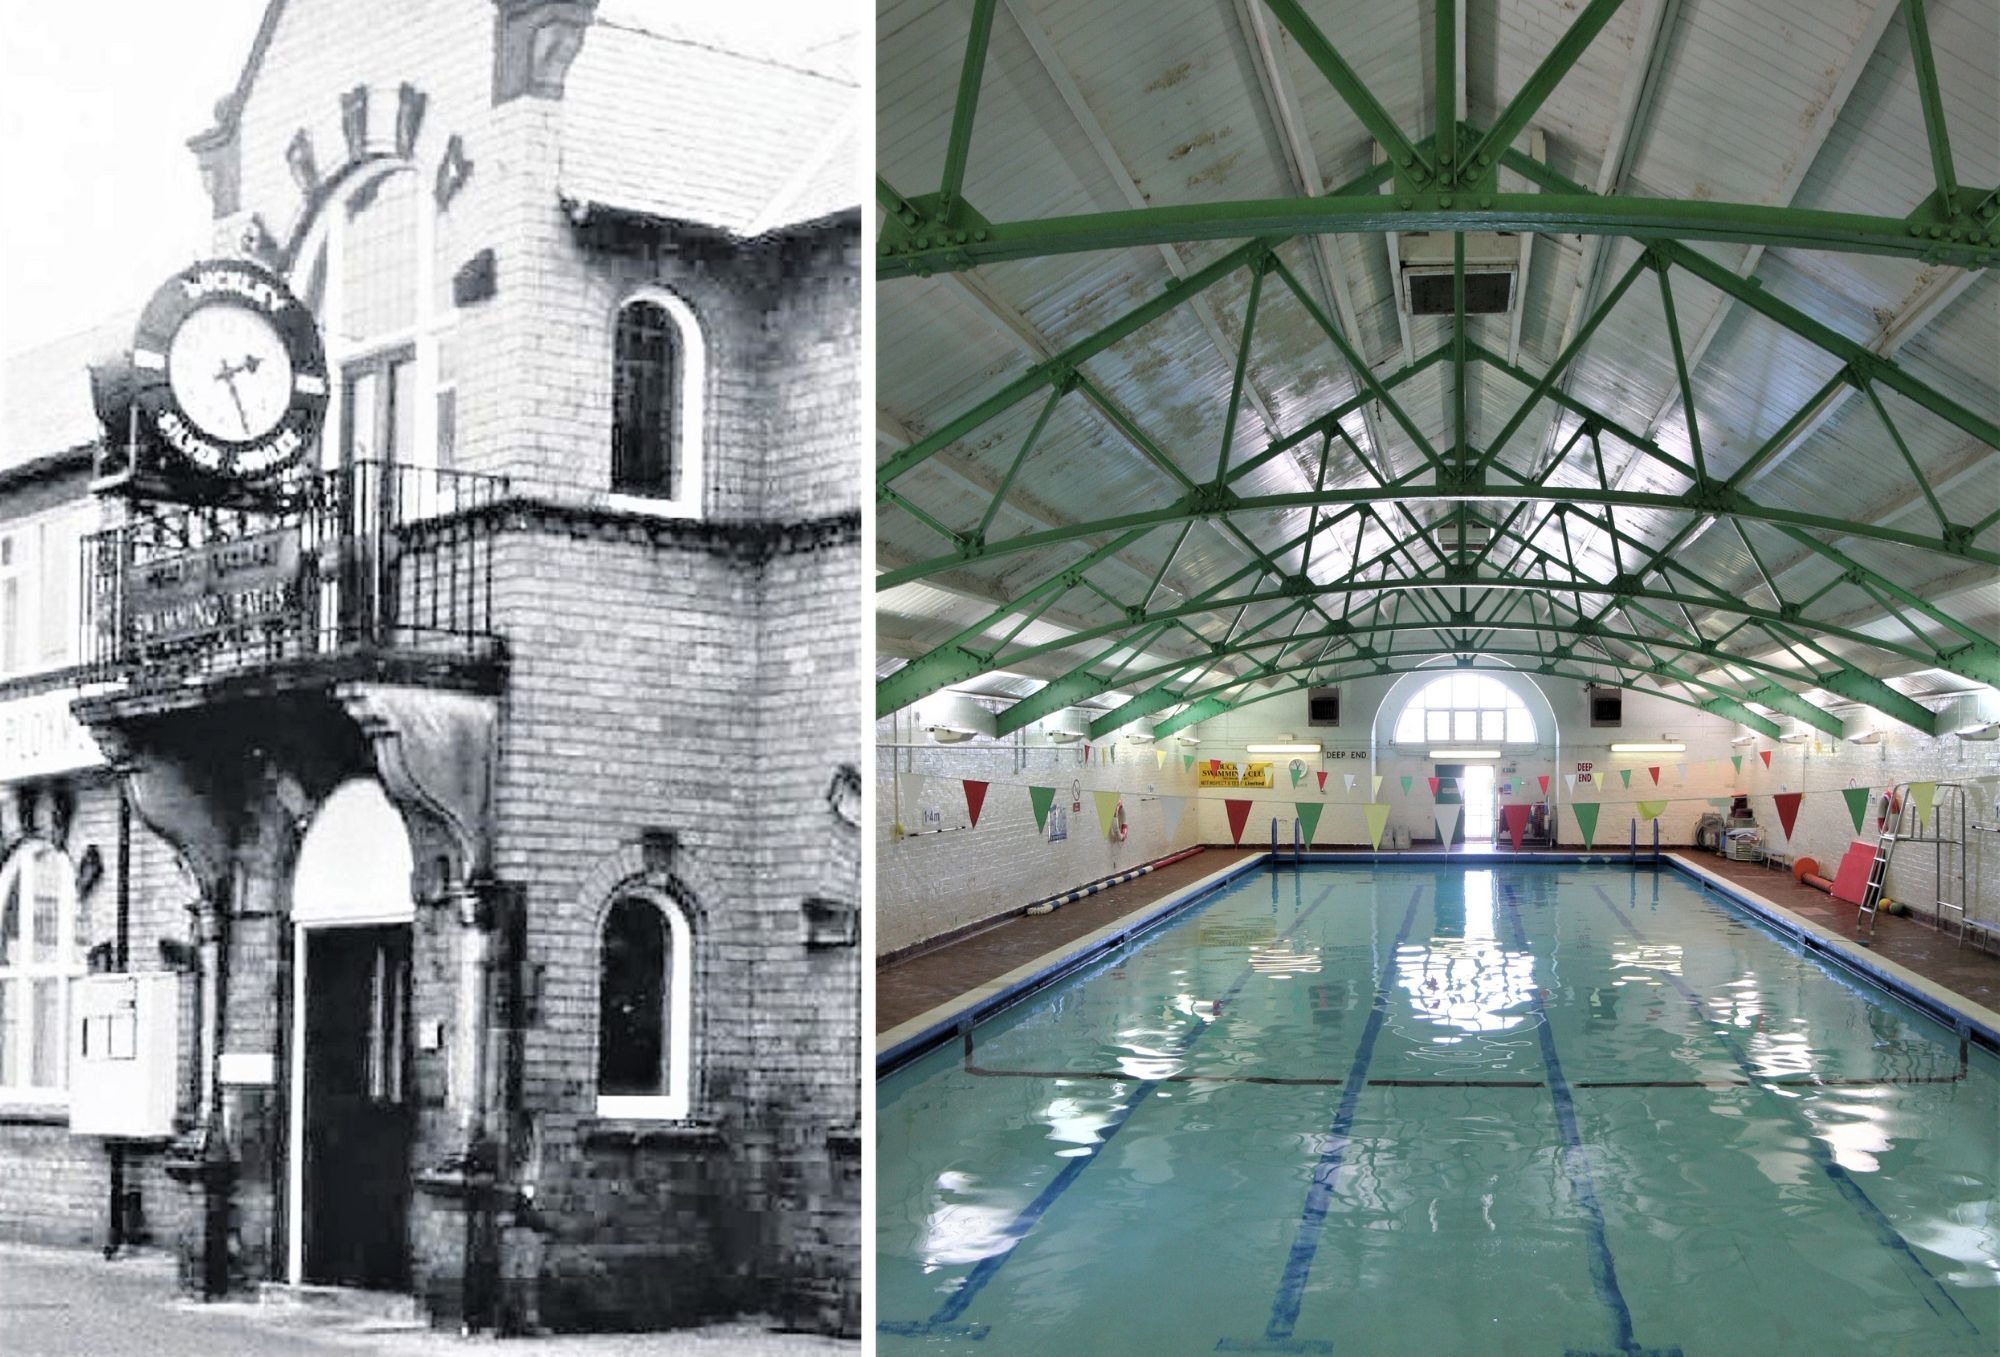 Buckley Baths, an institution for generations. Photo courtesy of Brian Bennett, and right, before their closure in 2004.